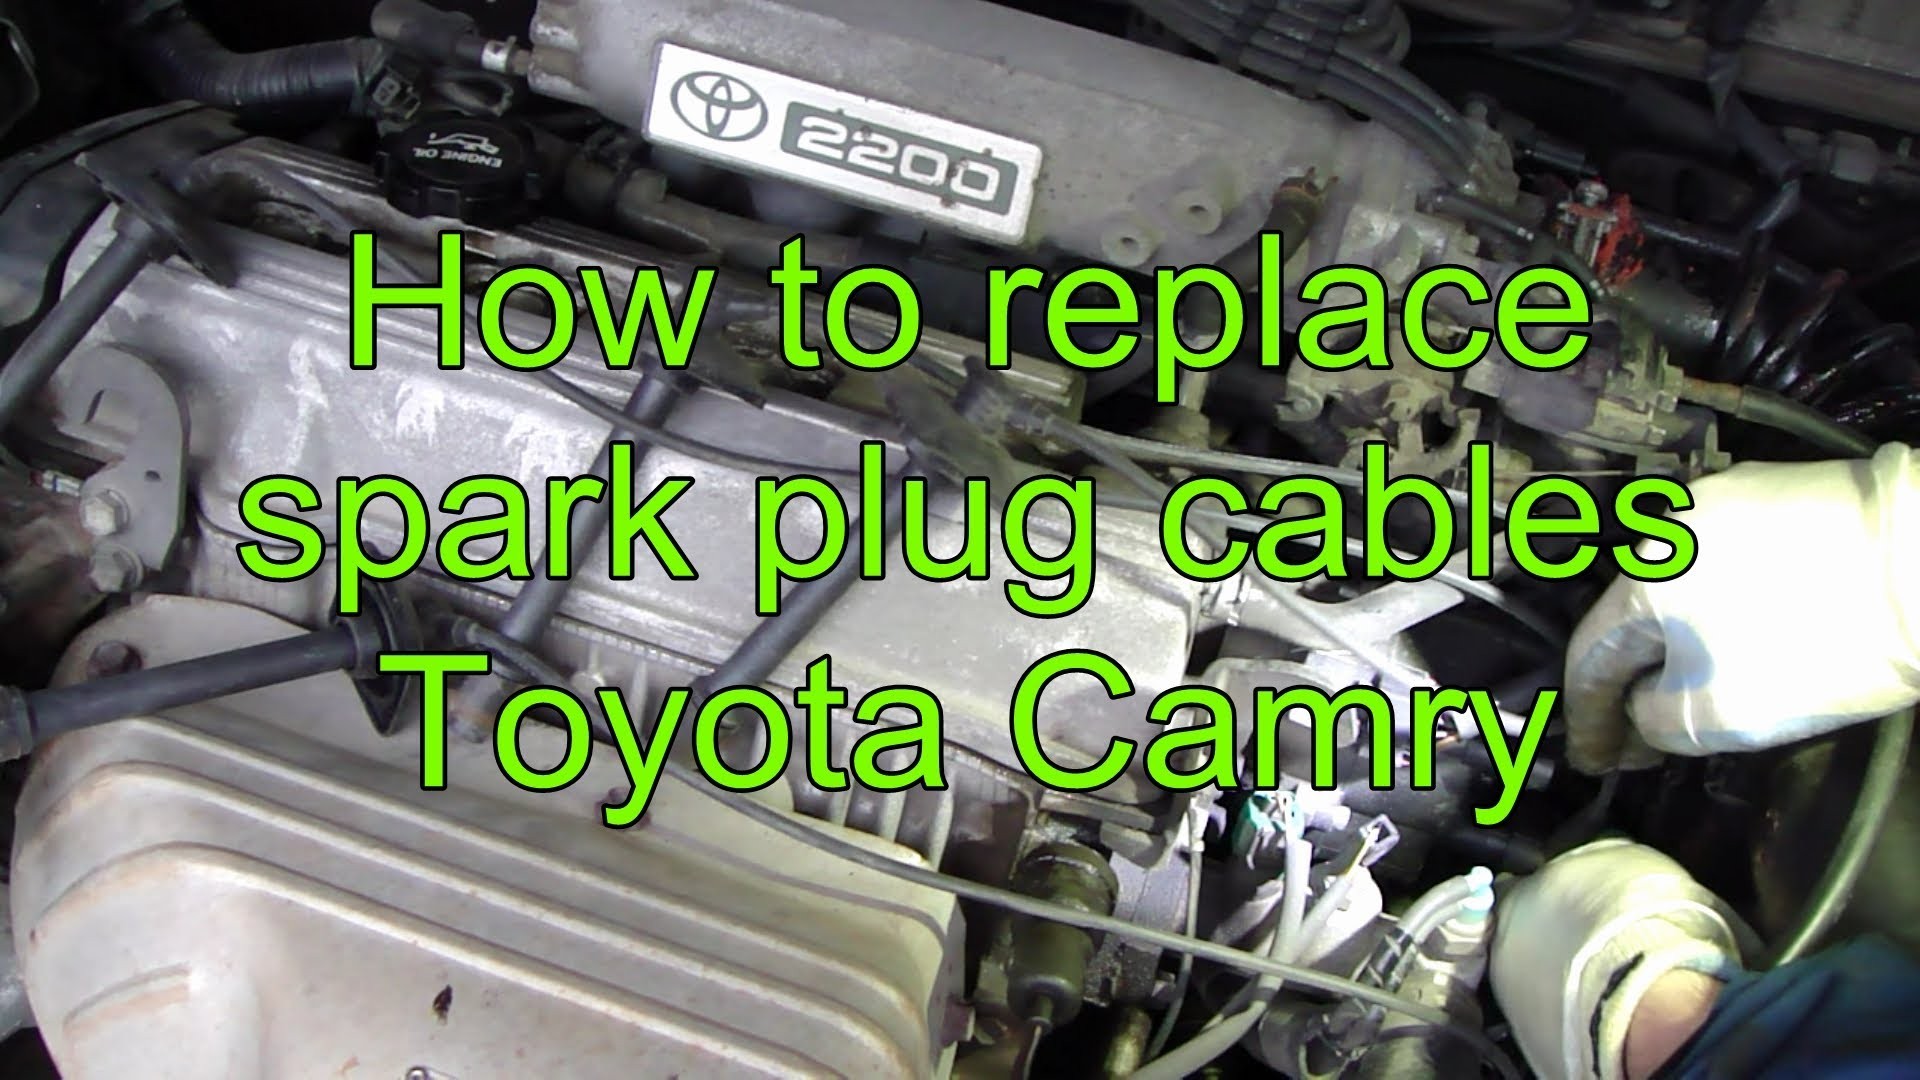 Toyota Camry 2000 Engine Diagram How to Replace Spark Plug Cables toyota Camry Of Toyota Camry 2000 Engine Diagram